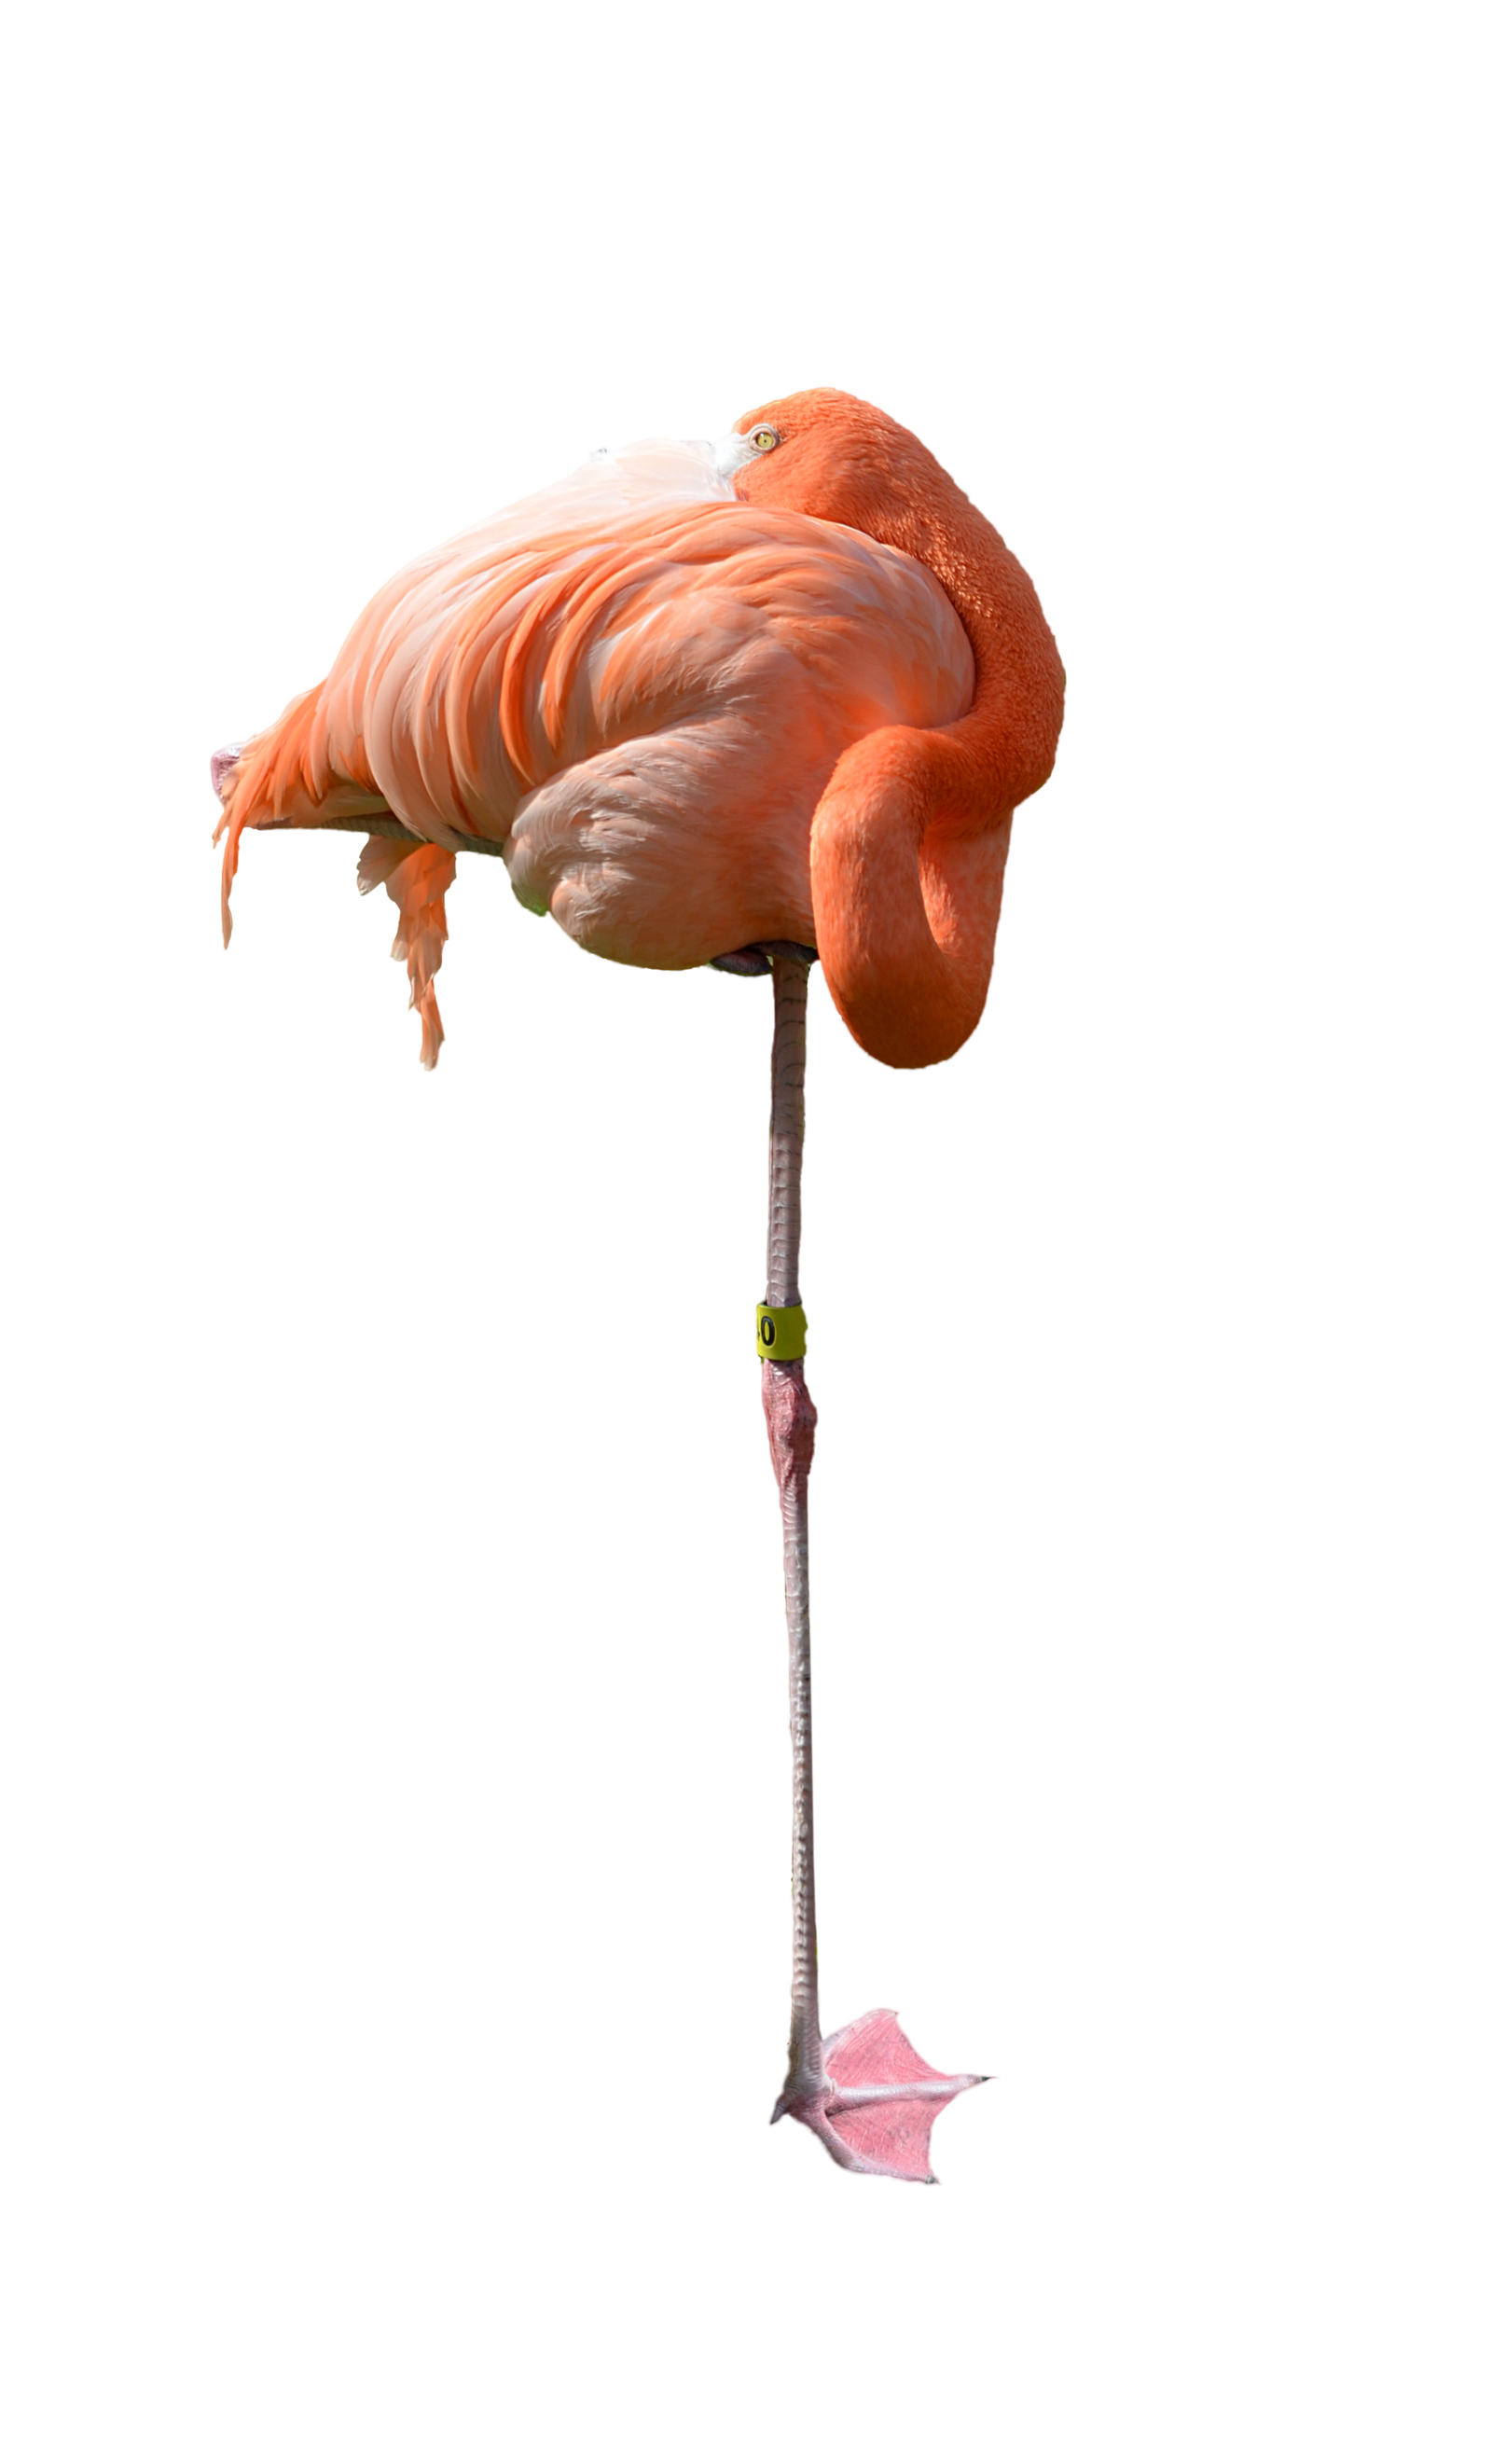 Flamingo PNG-beeld Transparante achtergrond